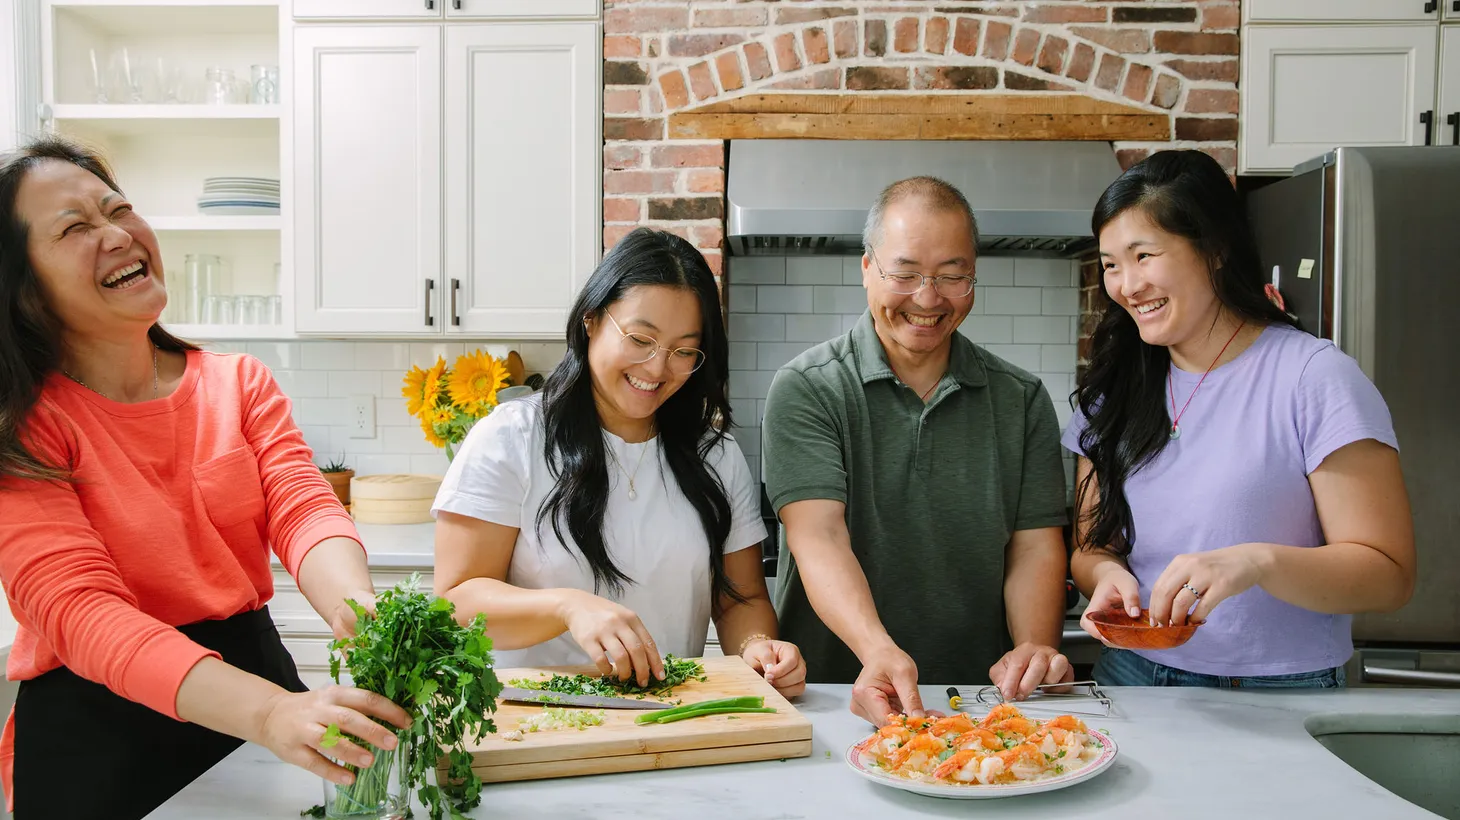 (From left to right) Judy, Kaitlin, Bill, and Sarah Leung created a blog, The Woks of Life, nearly a decade ago which has become the top online resource for Chinese cooking in English.